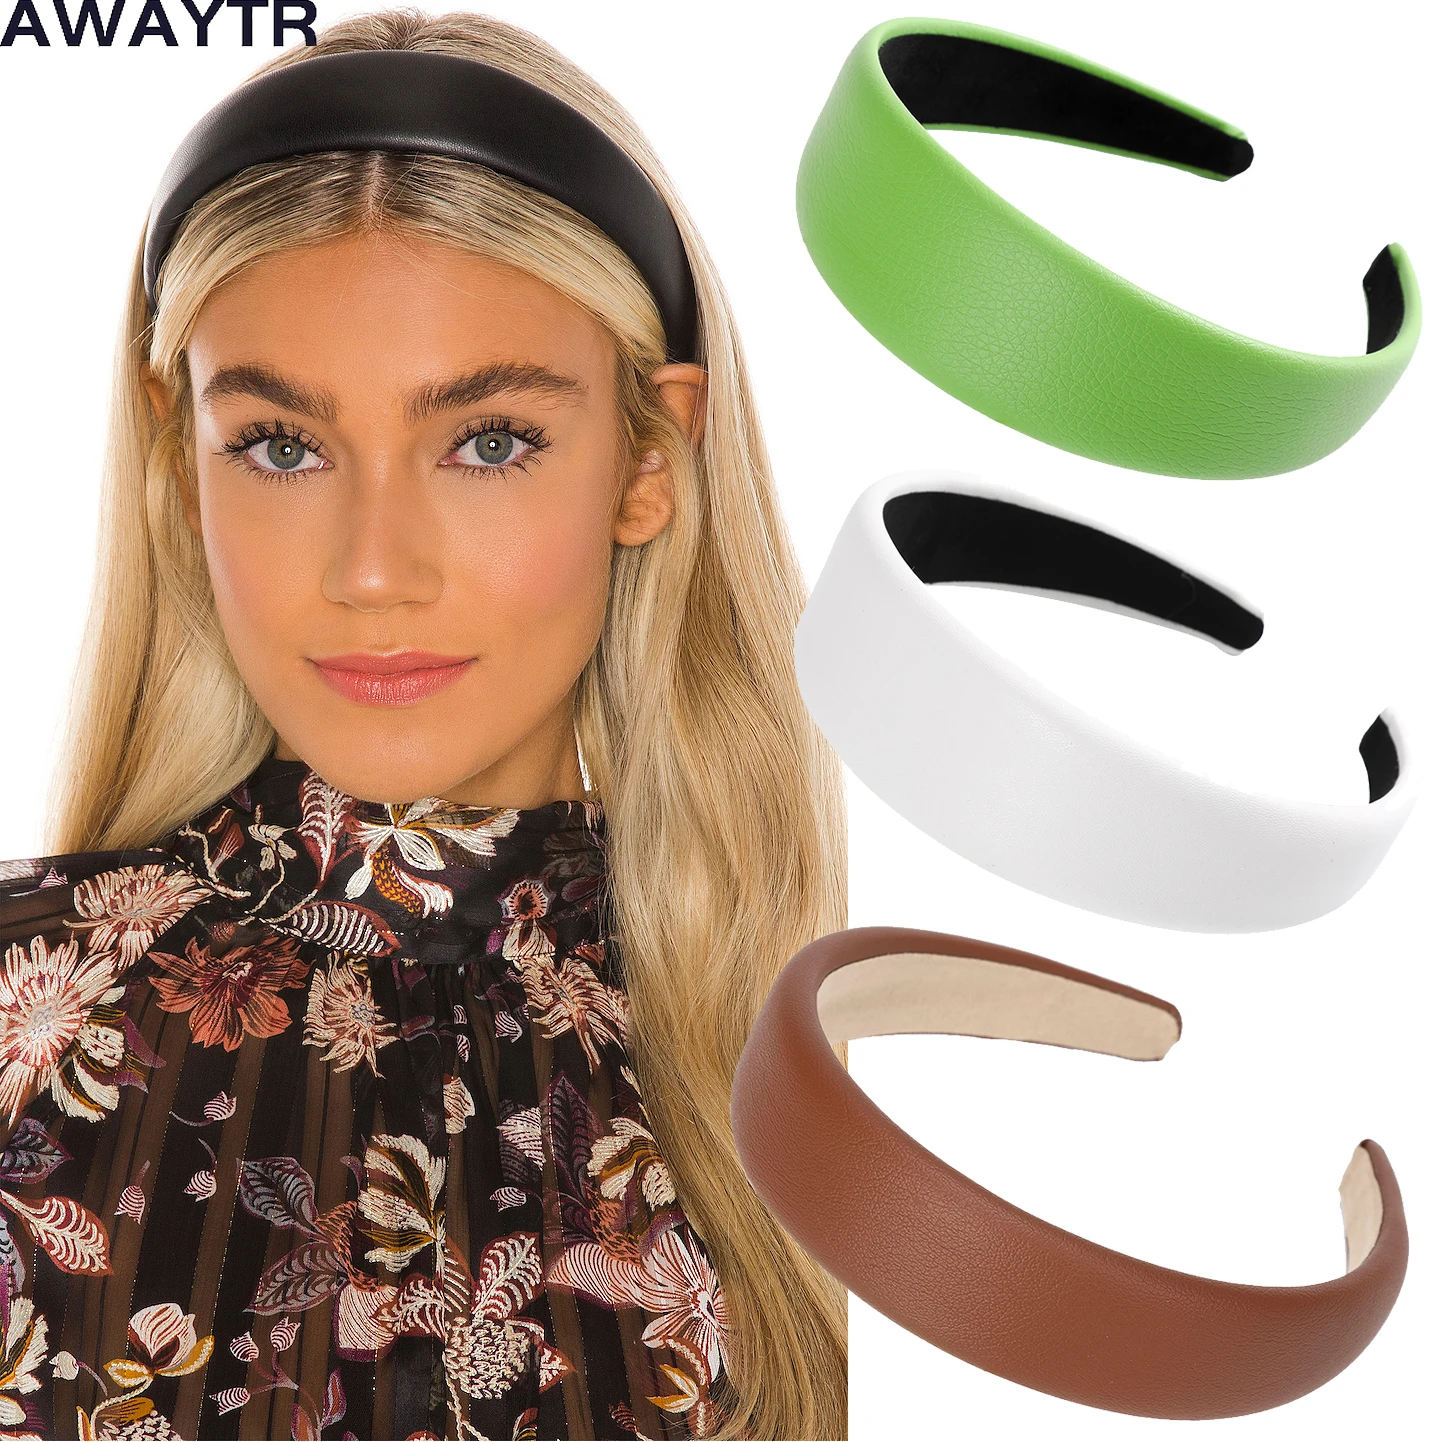 AWAYTR Solid Color Leather Hairbands Girls Headband non-slip Hair Hoops Wide Side Head Band Women Bezel Fashion Hair Accessories